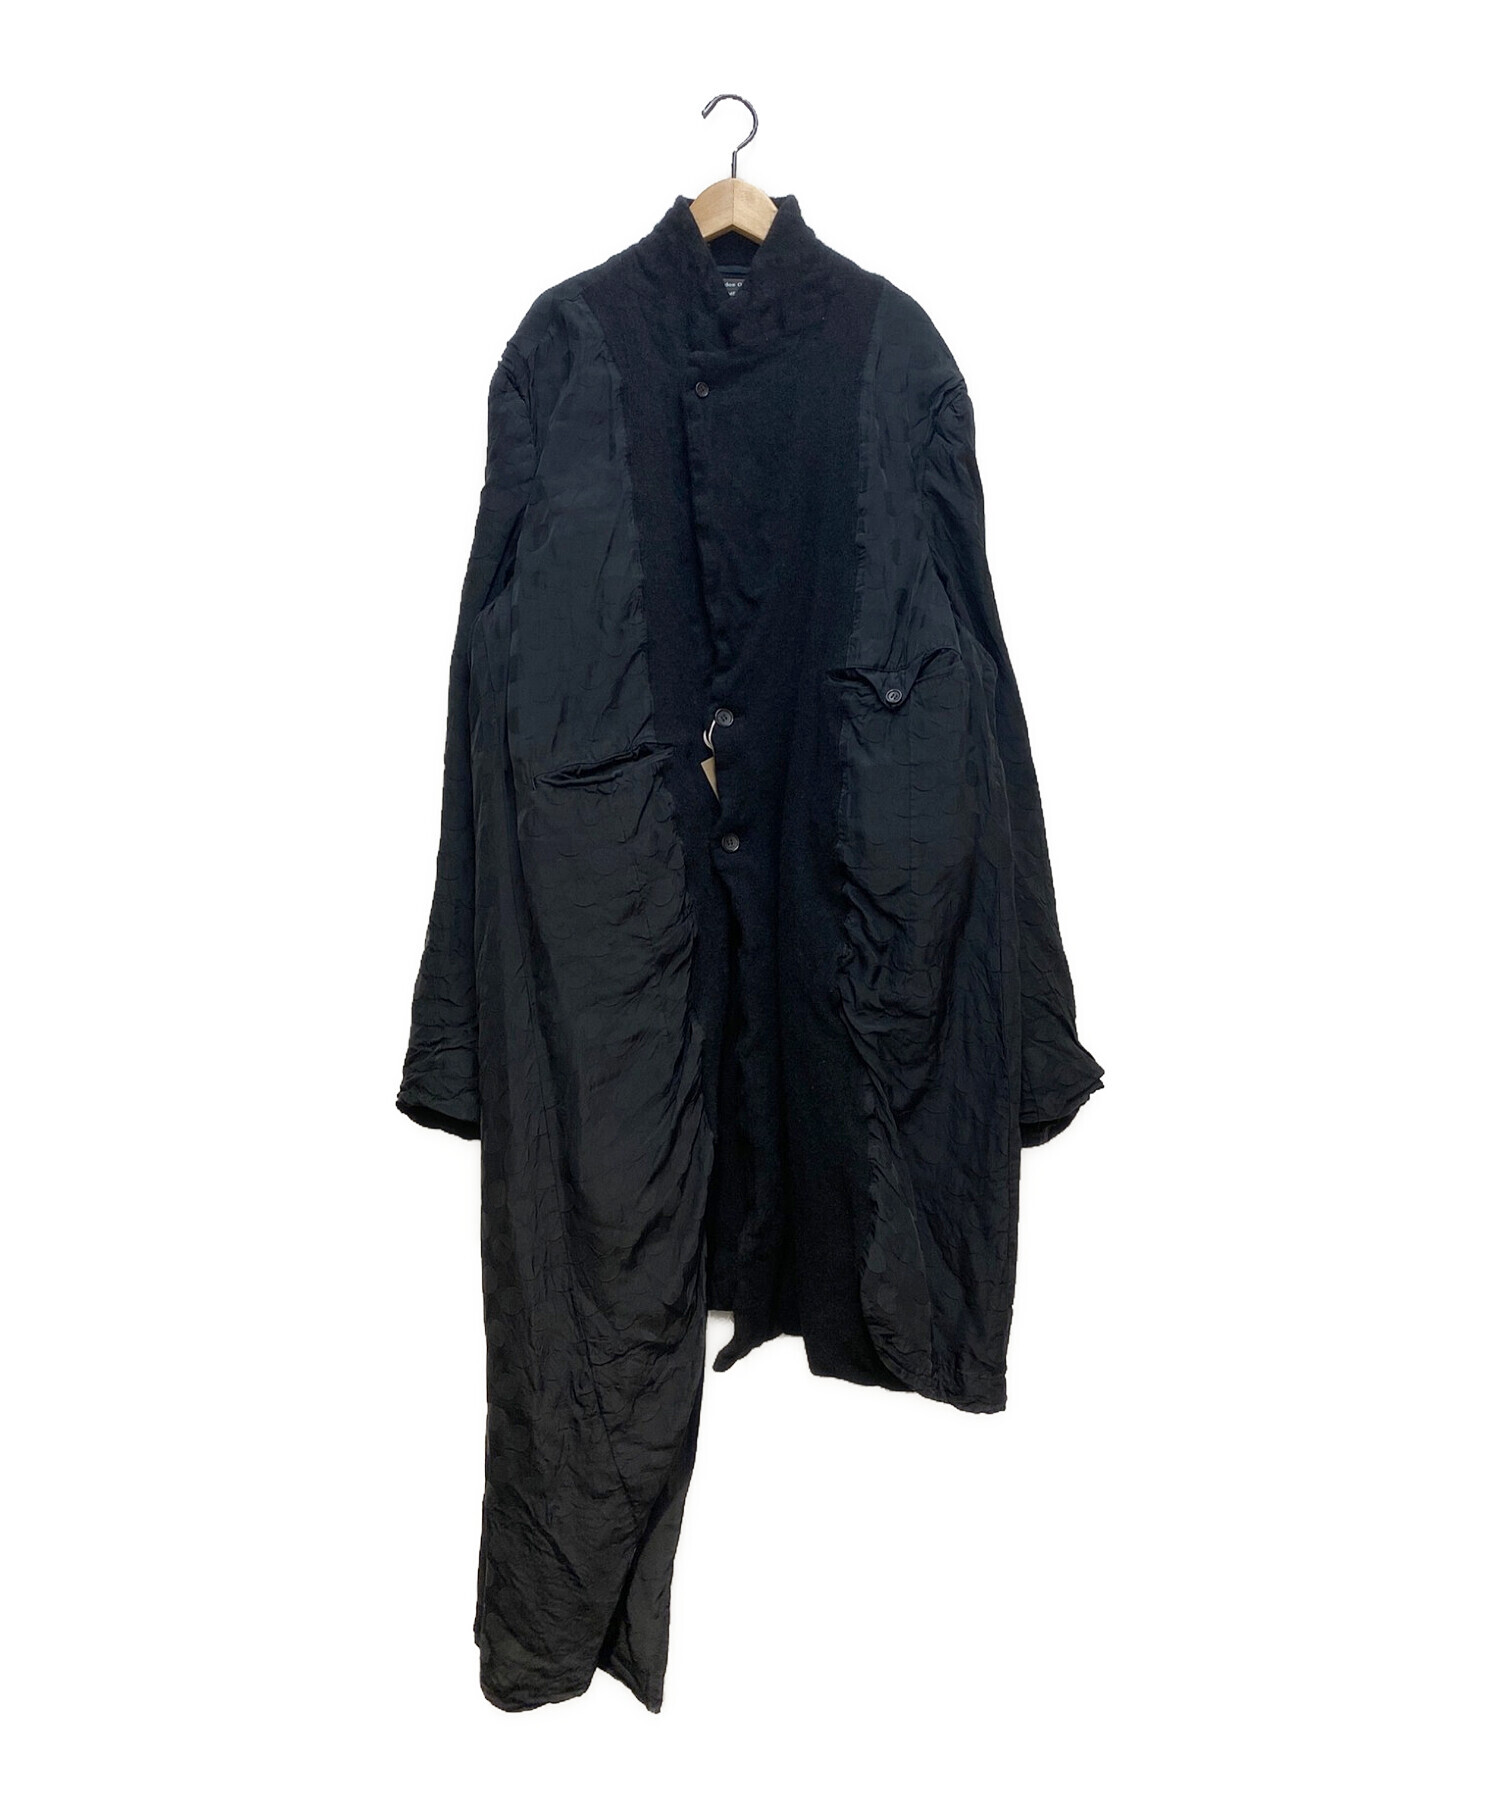 COMME des GARCONS HOMME 21AW ウールサージ 縮絨 コート